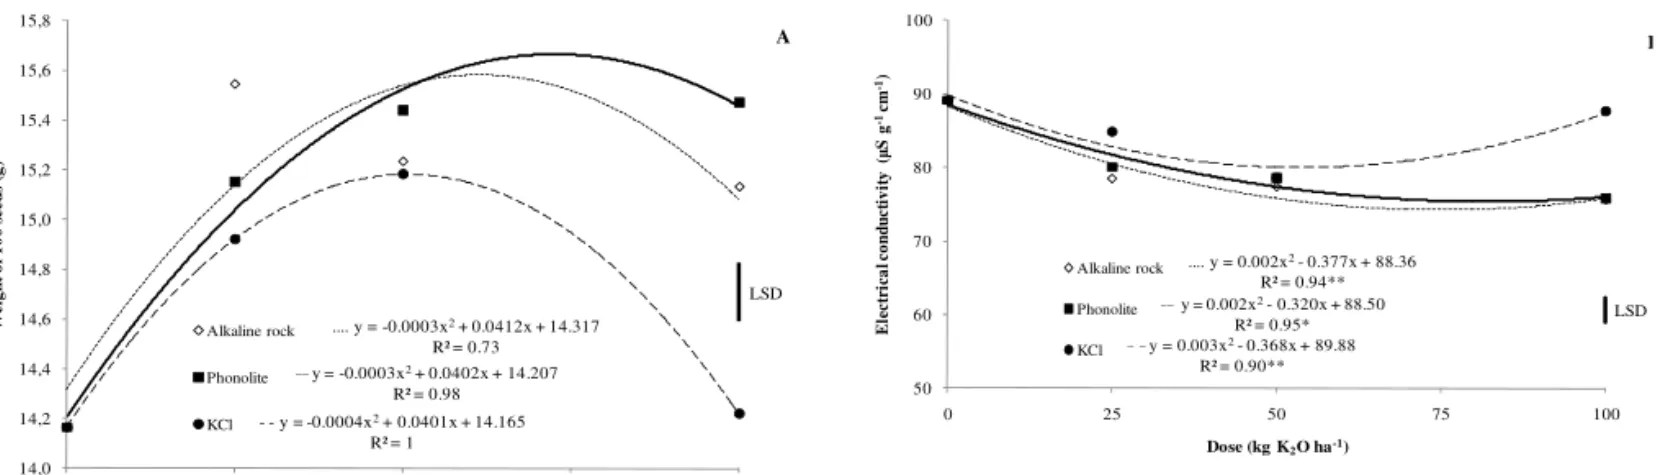 FIGURE 2. Weight (A) and electrical conductivity (B) of soybean seeds for K sources and doses.* 